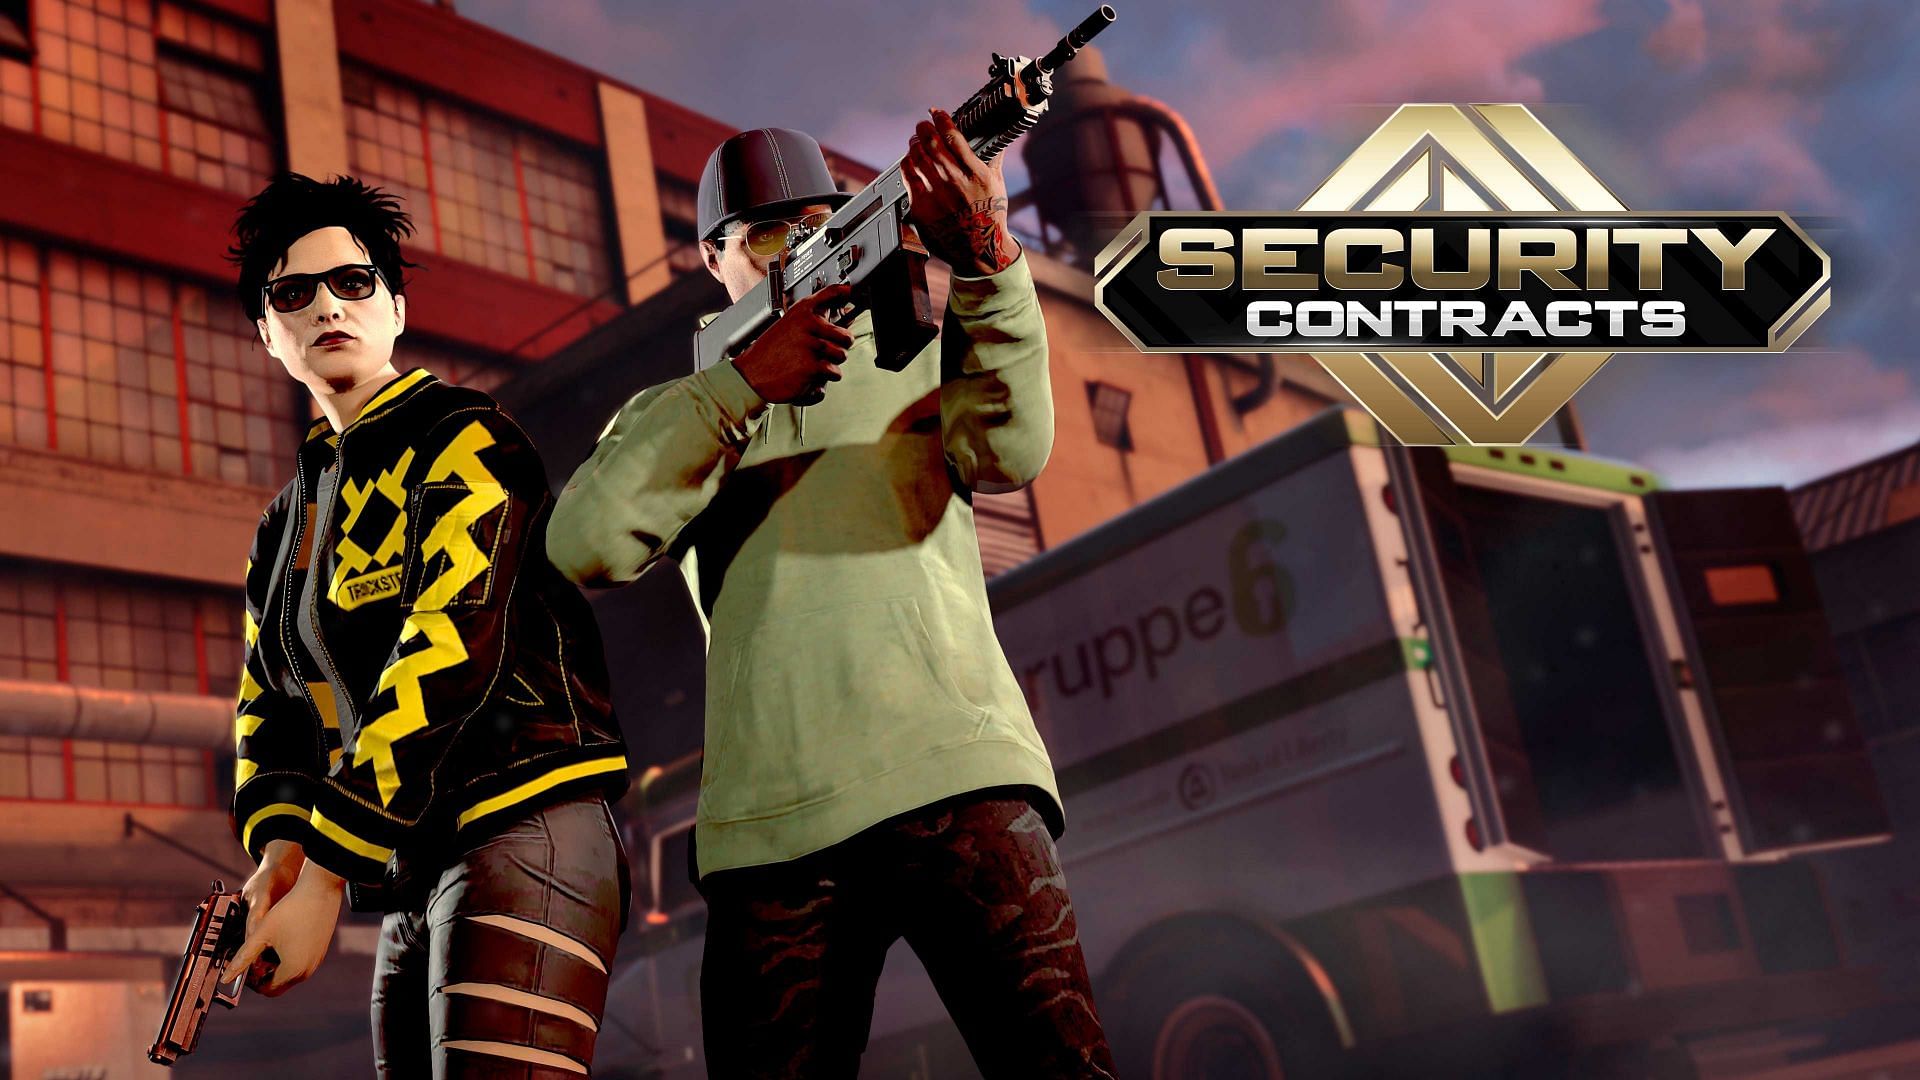 Security Contracts also give 2x cash and RP this week (Image via Rockstar Games)